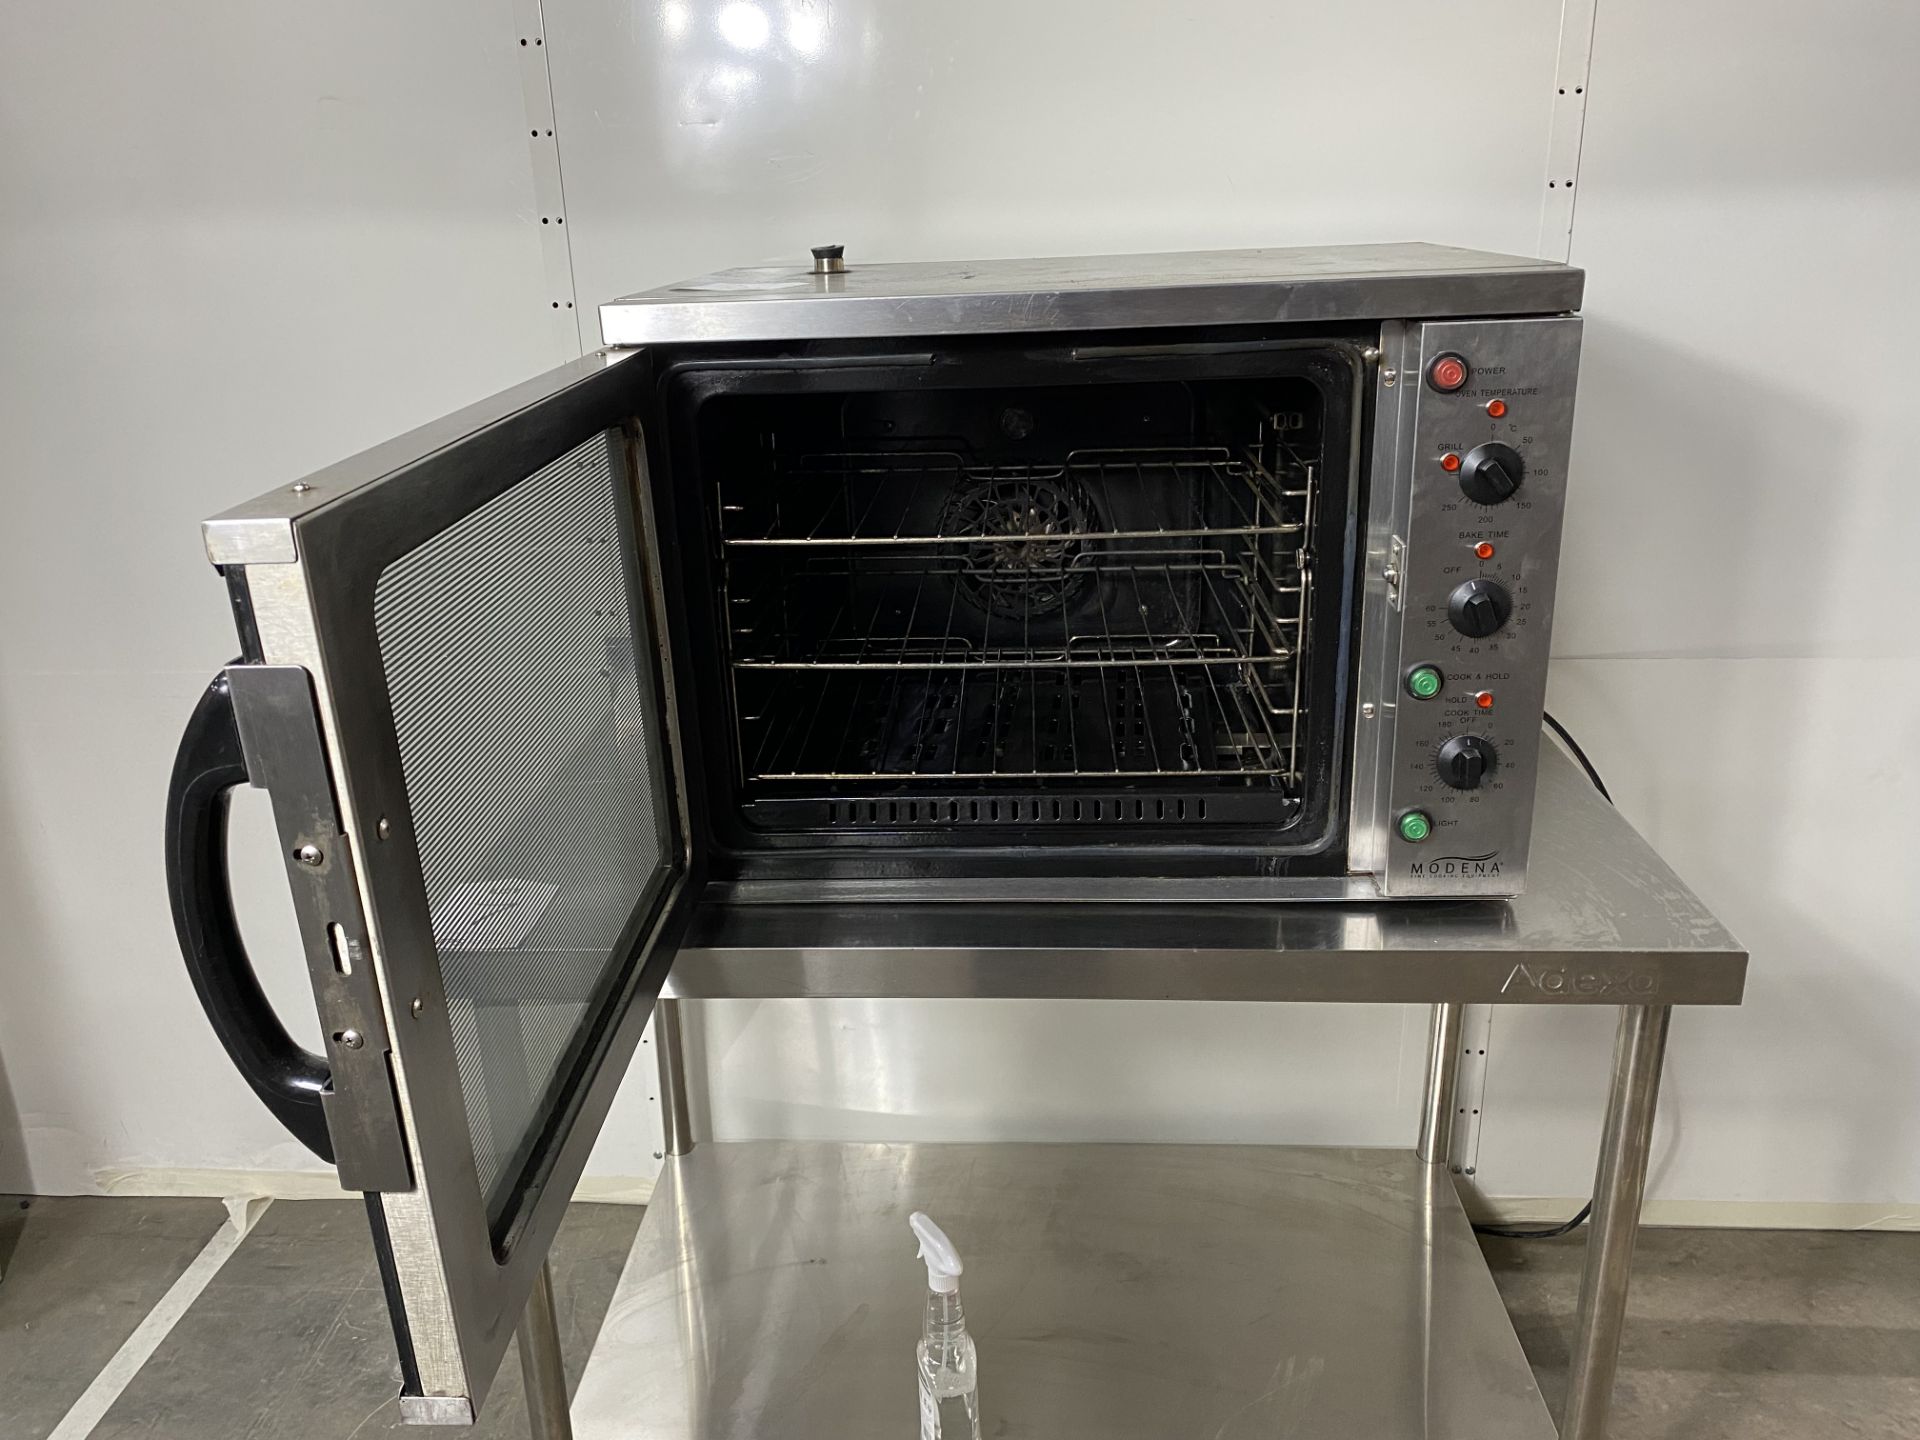 Modena CTC001 Electric Countertop Convection Oven With Grill - Image 3 of 14